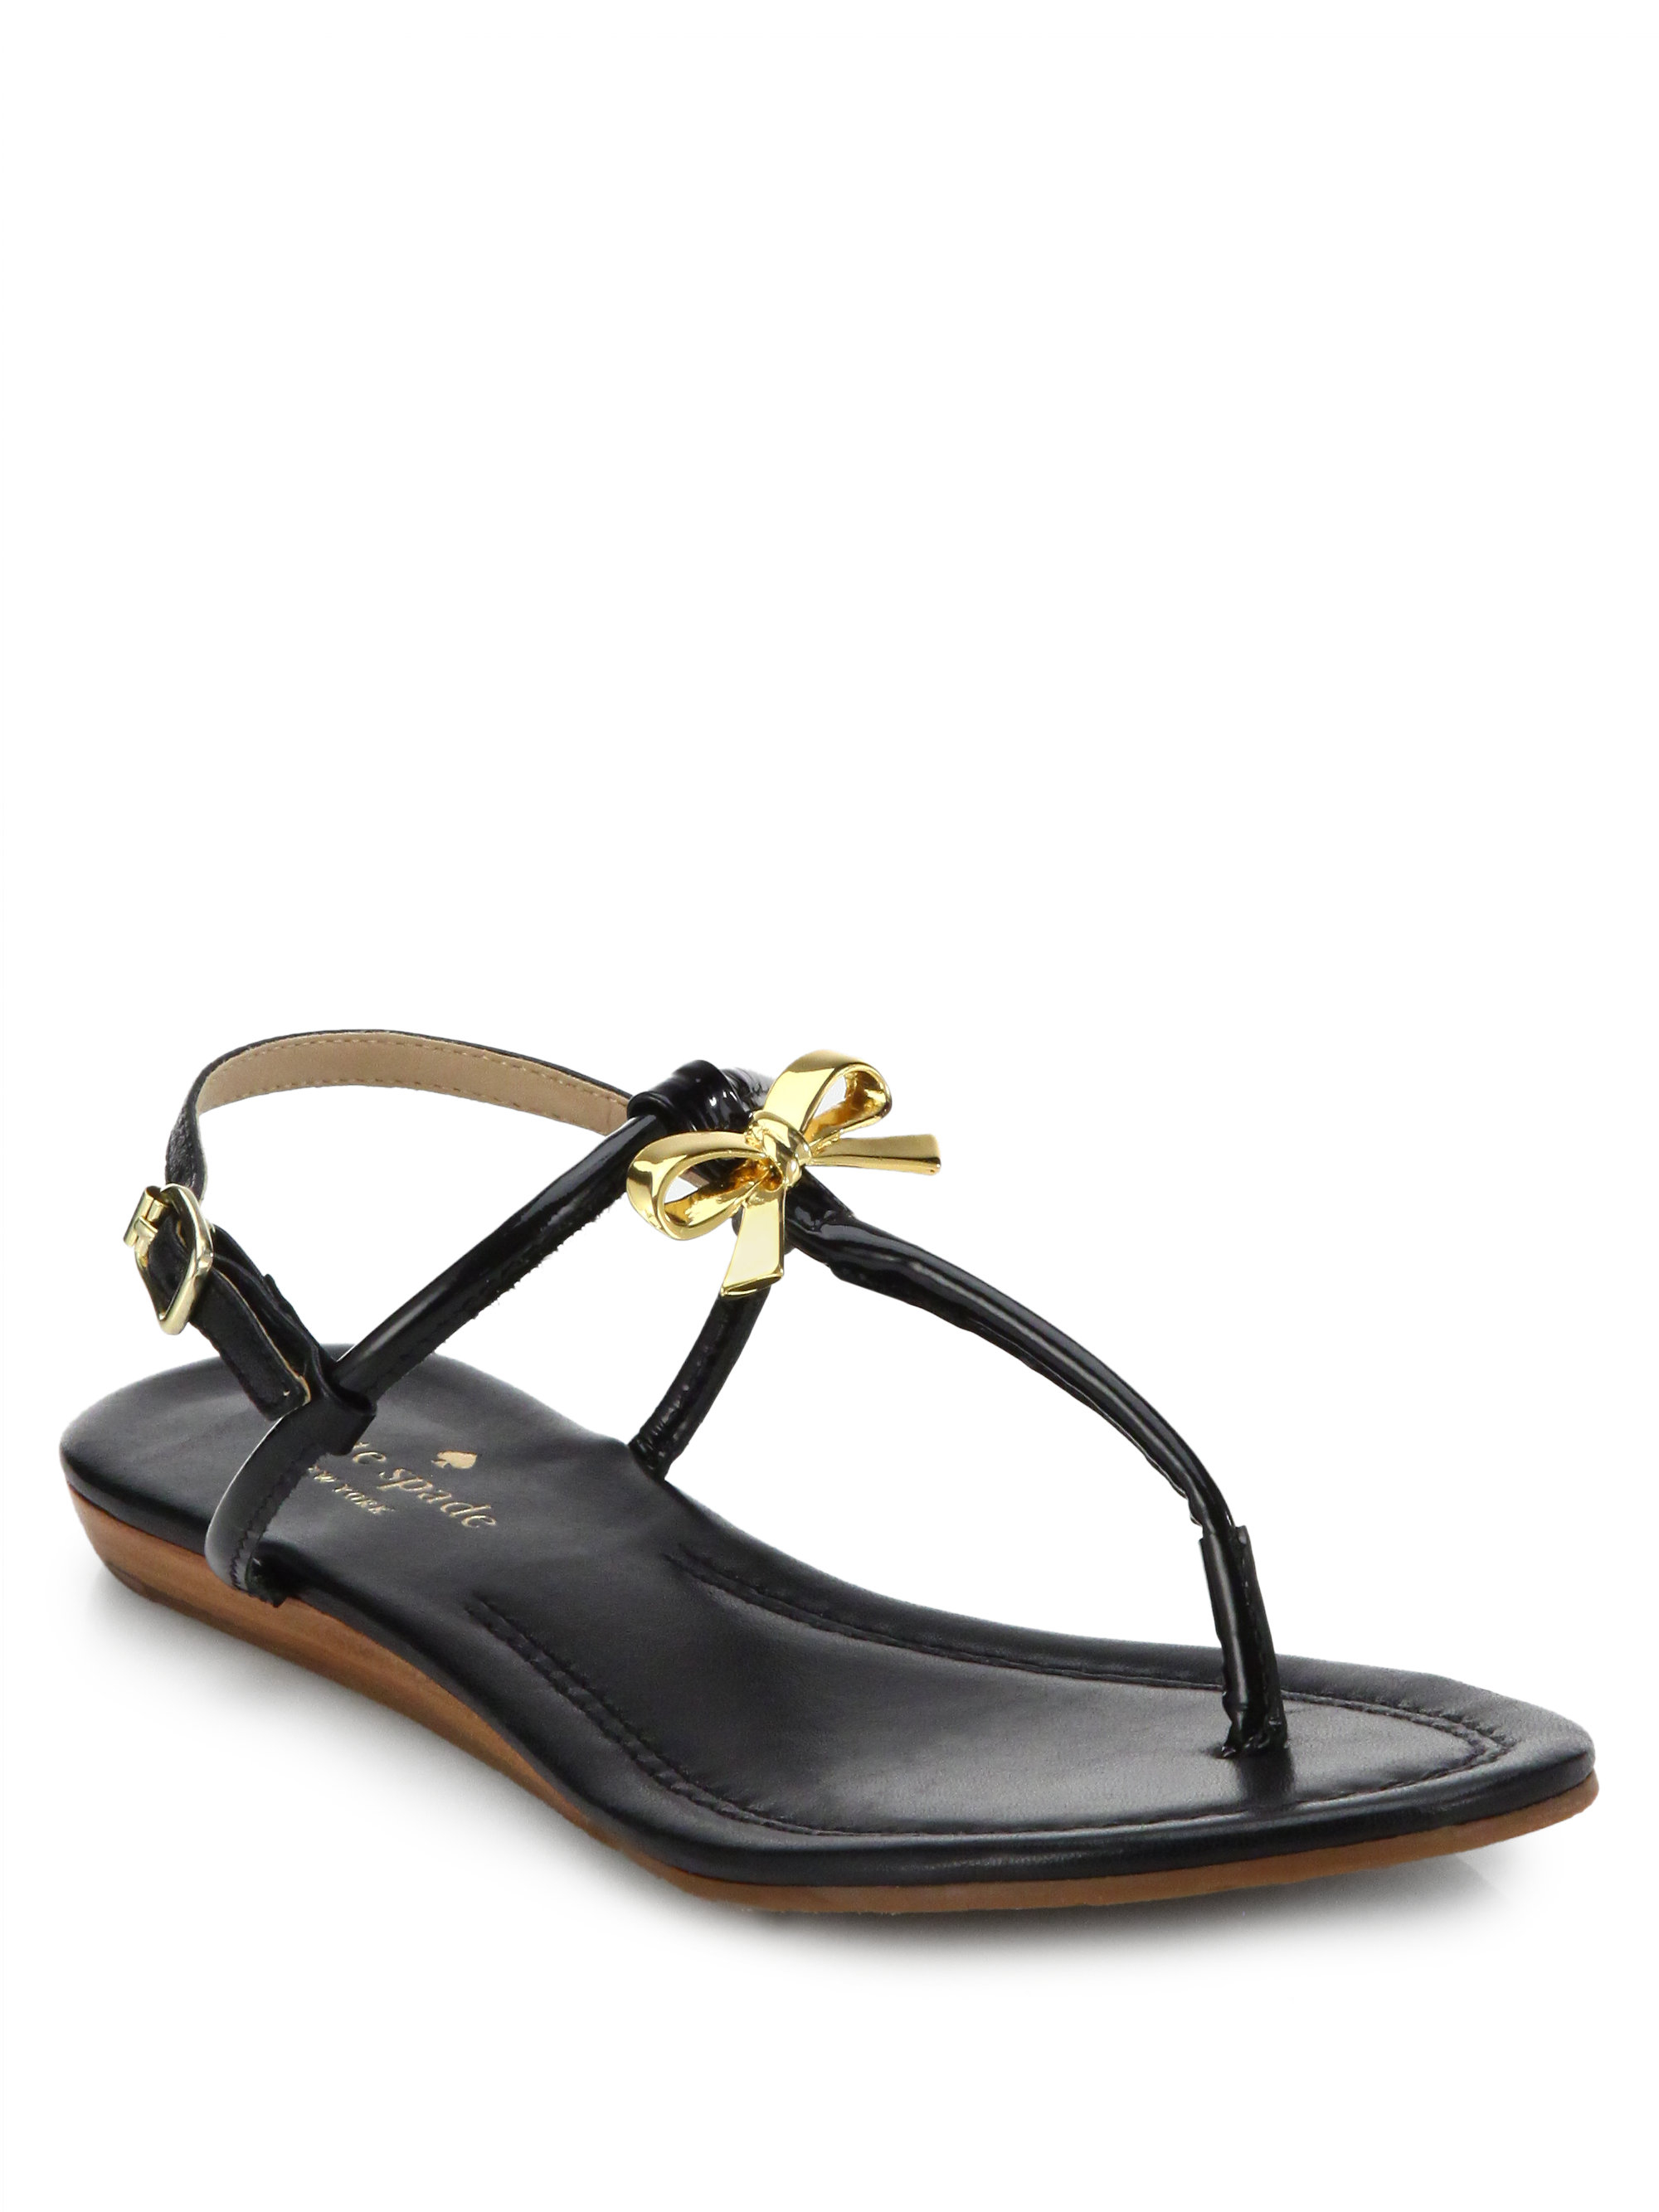 Kate Spade Tracie Flat Wedge Sandals in Black | Lyst